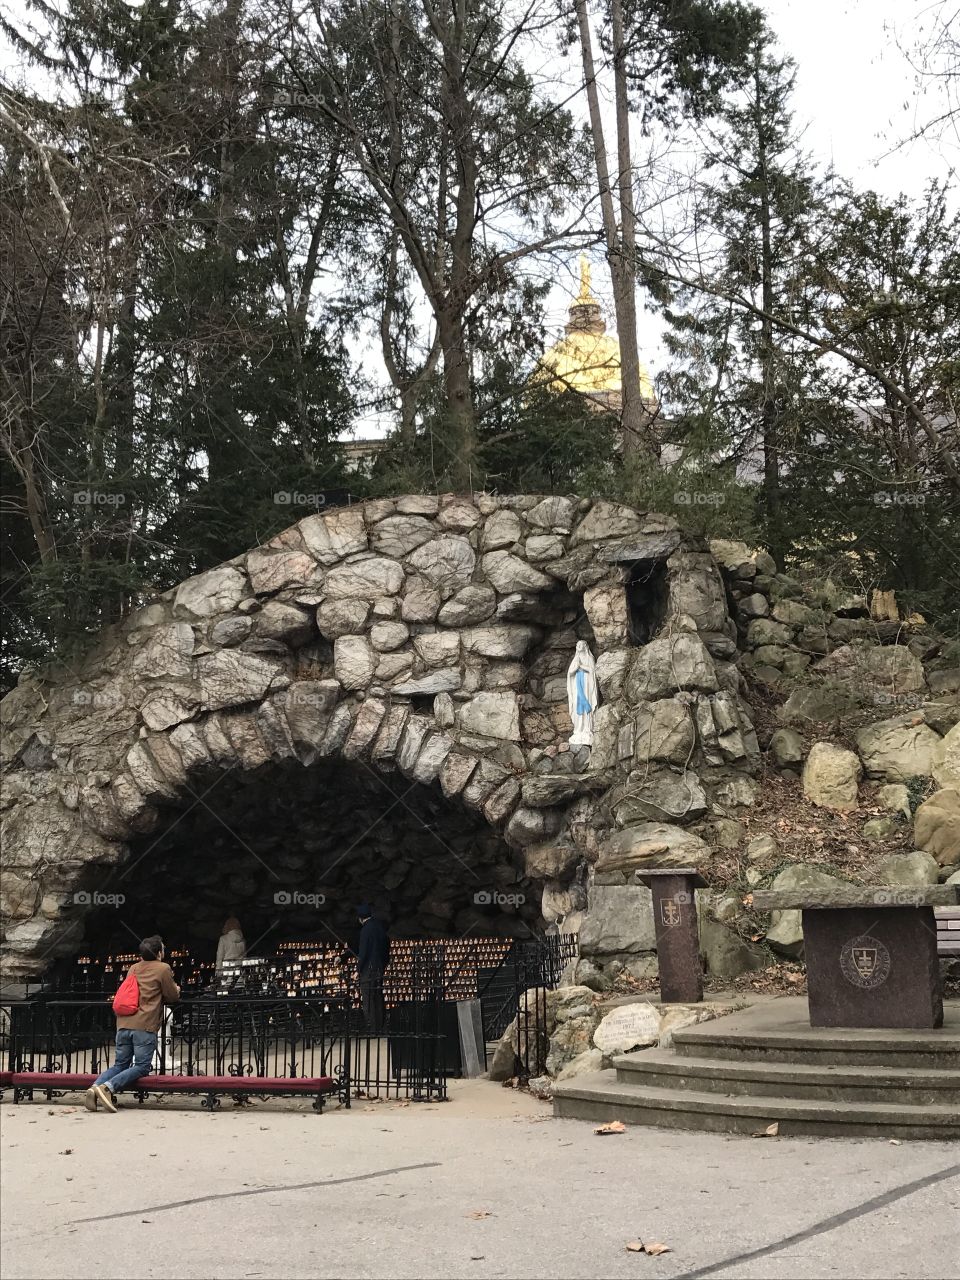 The Grotto of Our Lady of Lourdes is located at the University of Notre Dame 